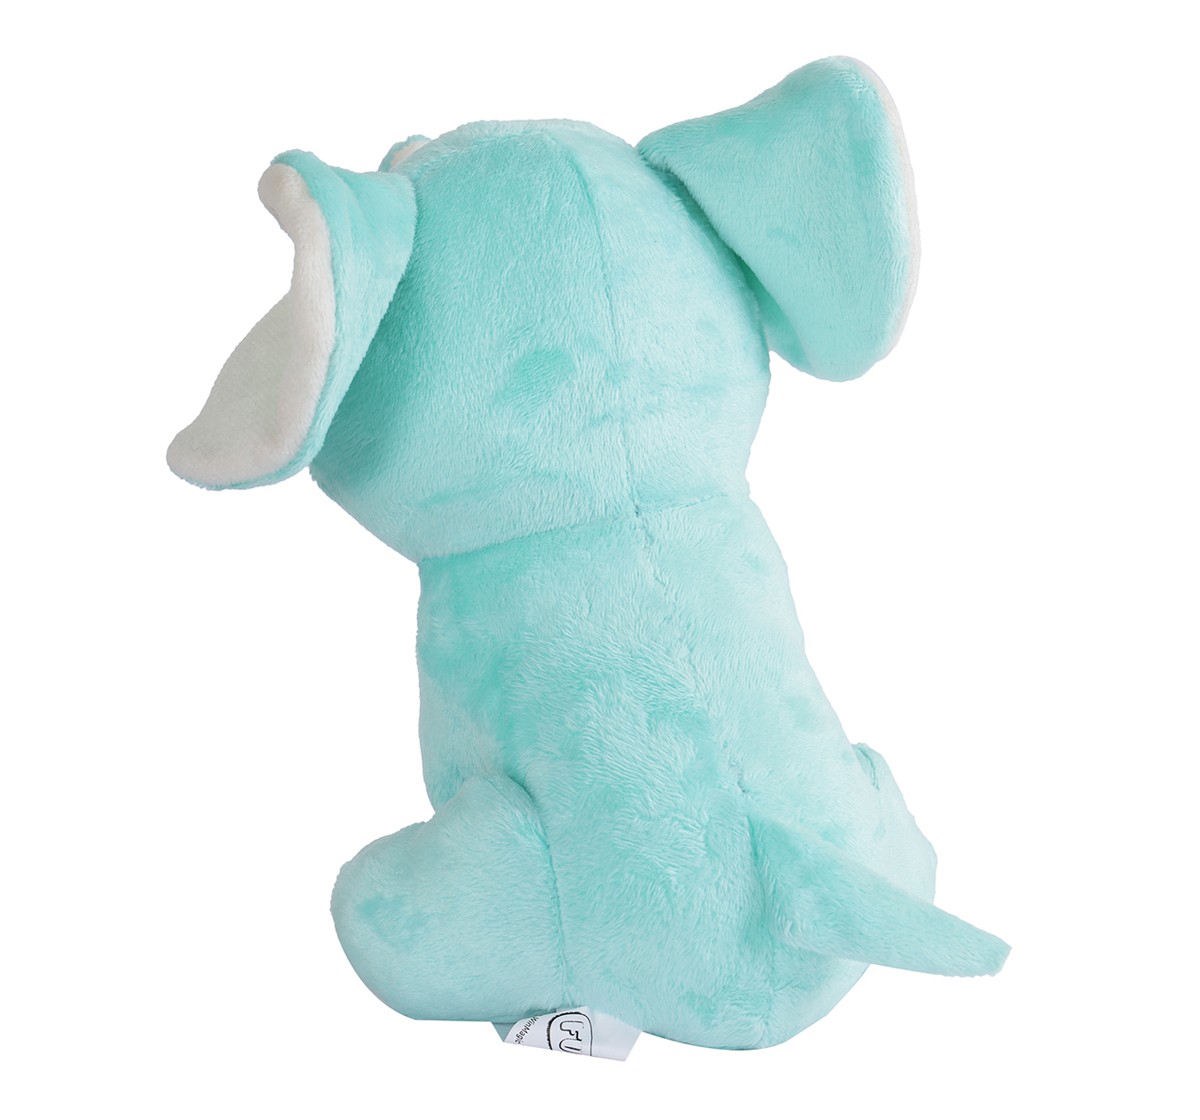 Furrendz Playful Eli 10" Plush Green for Kids 1 Year and Above